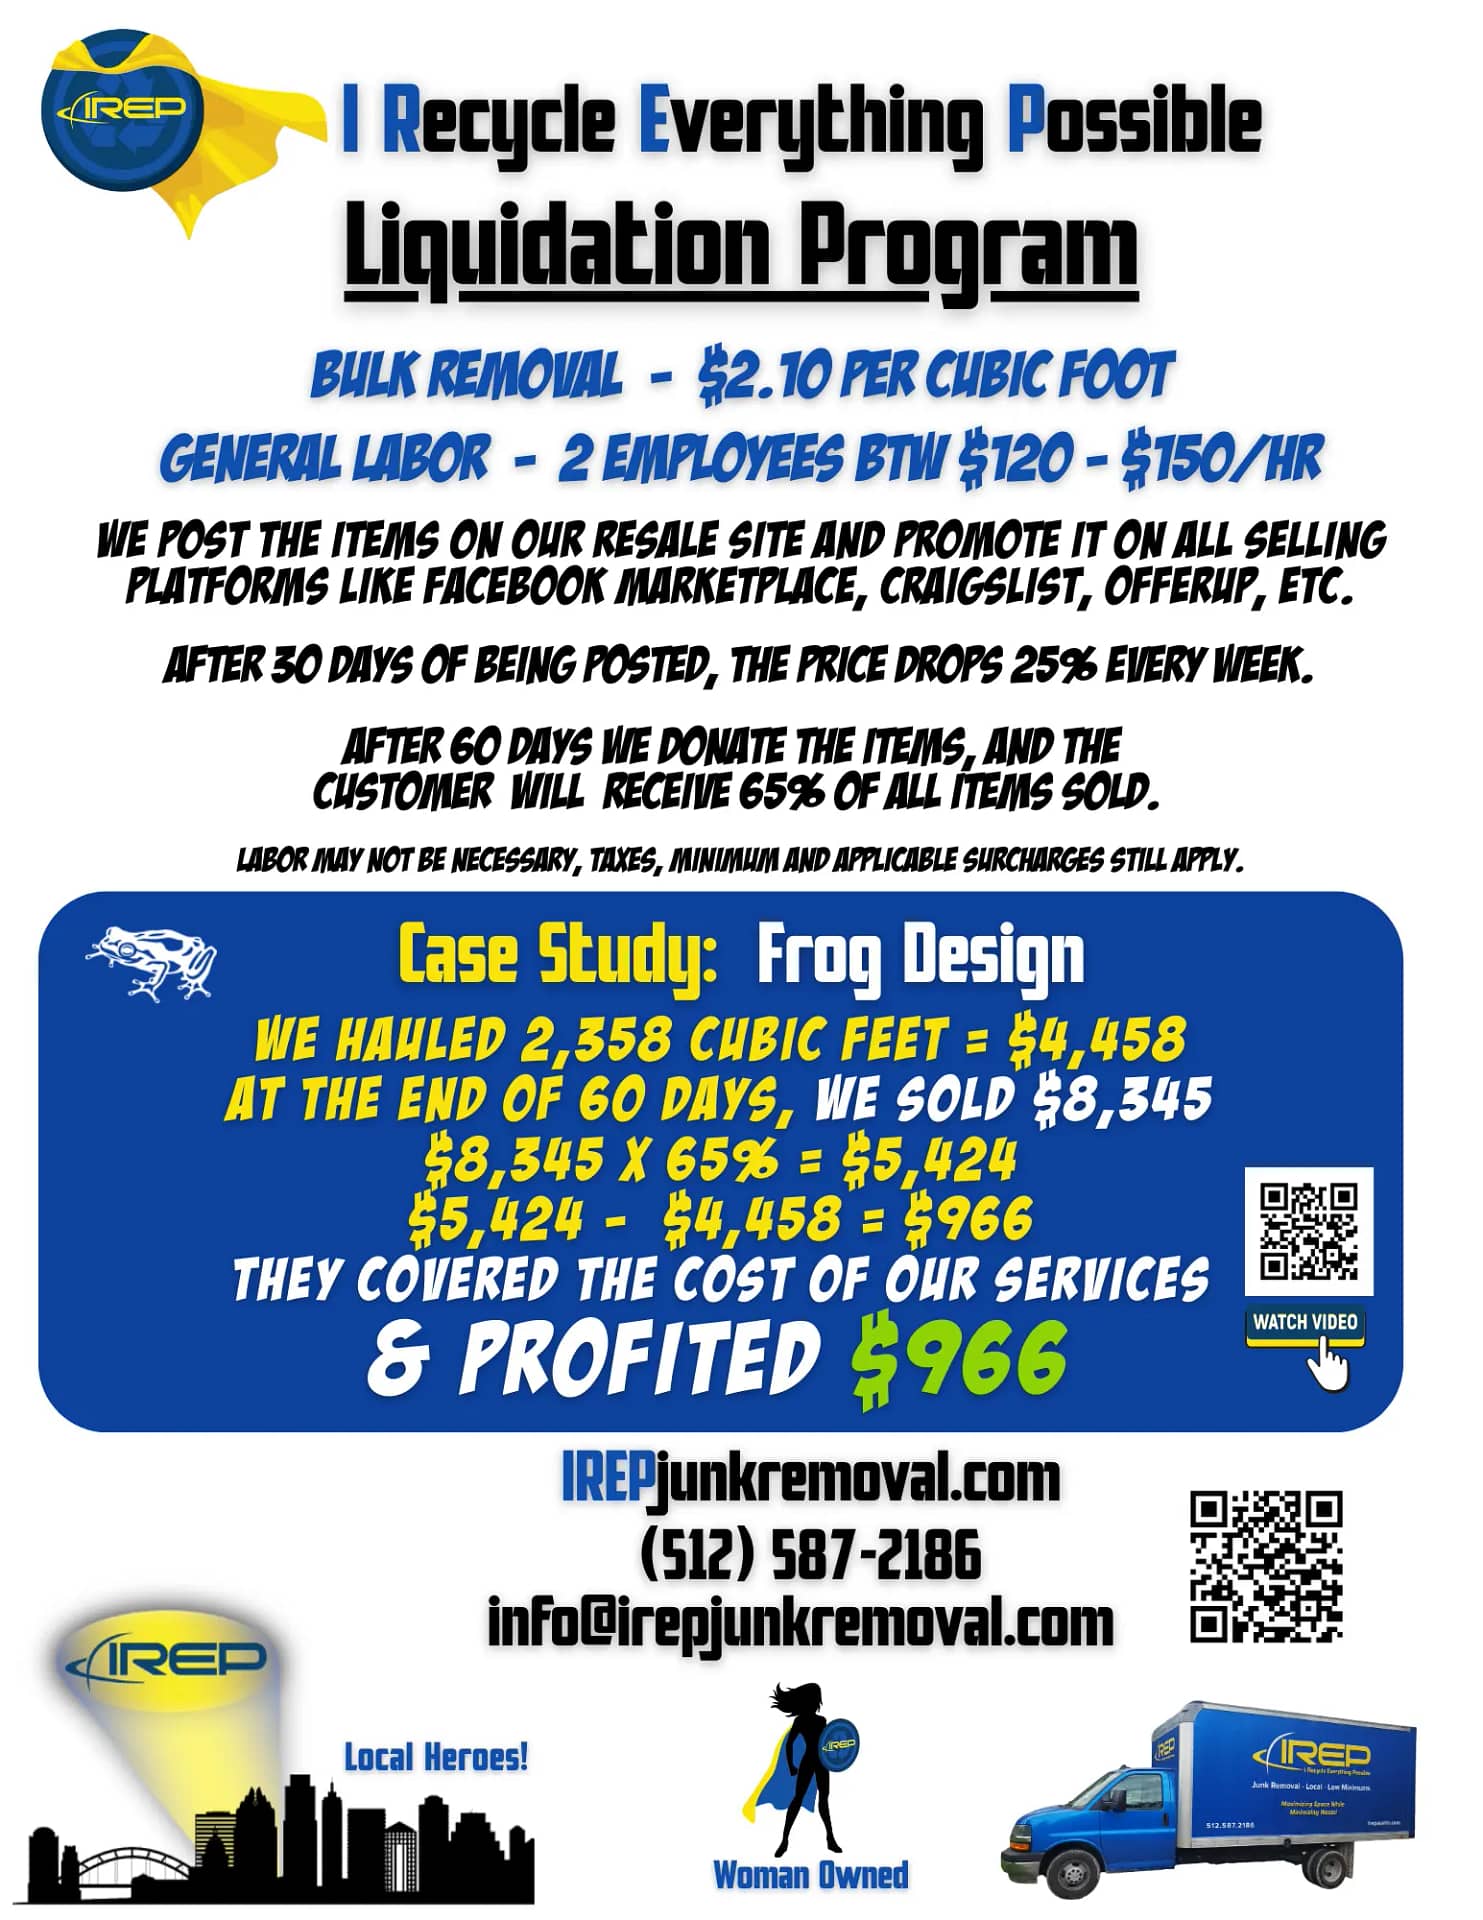 IREP Junk Removal Liquidation case study for Frog Design in Austin, TX